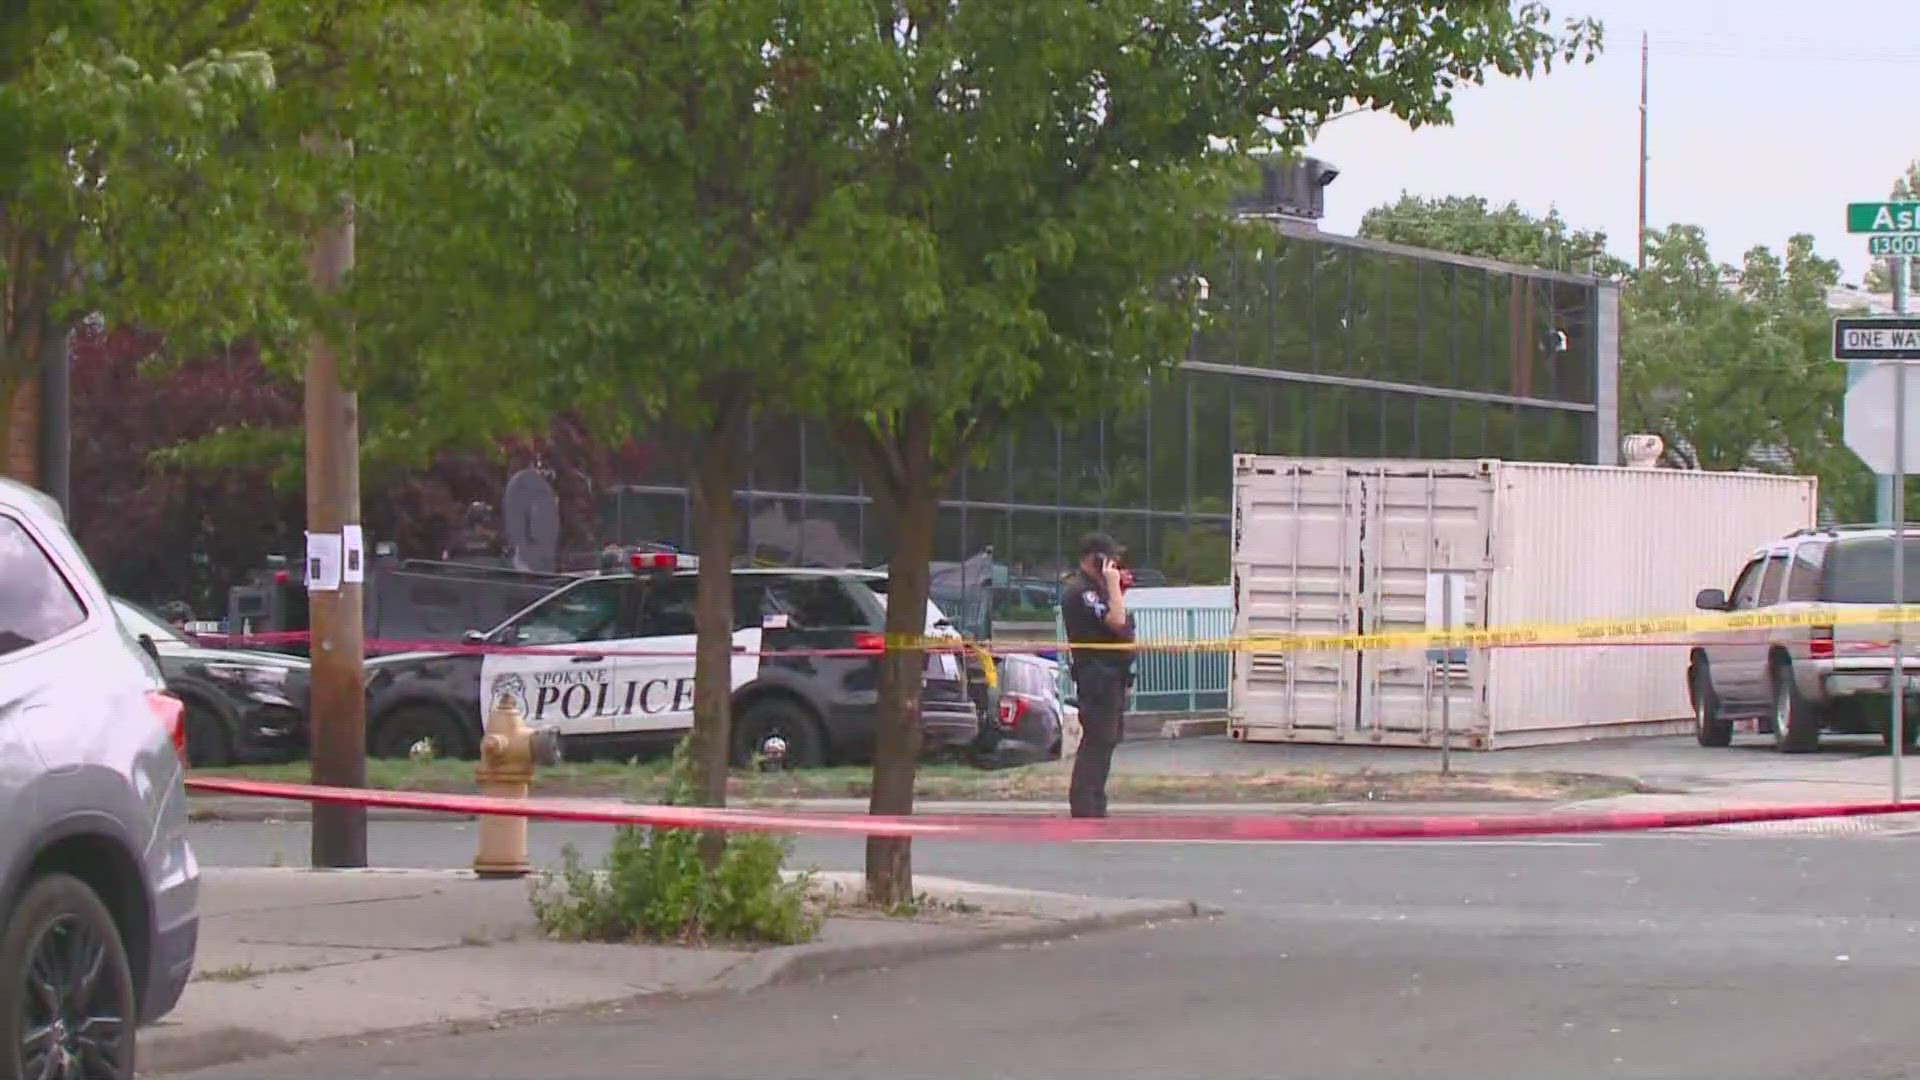 Police say a suspect has barricaded themselves near the DSHS building at 1313 N. Maple Street.